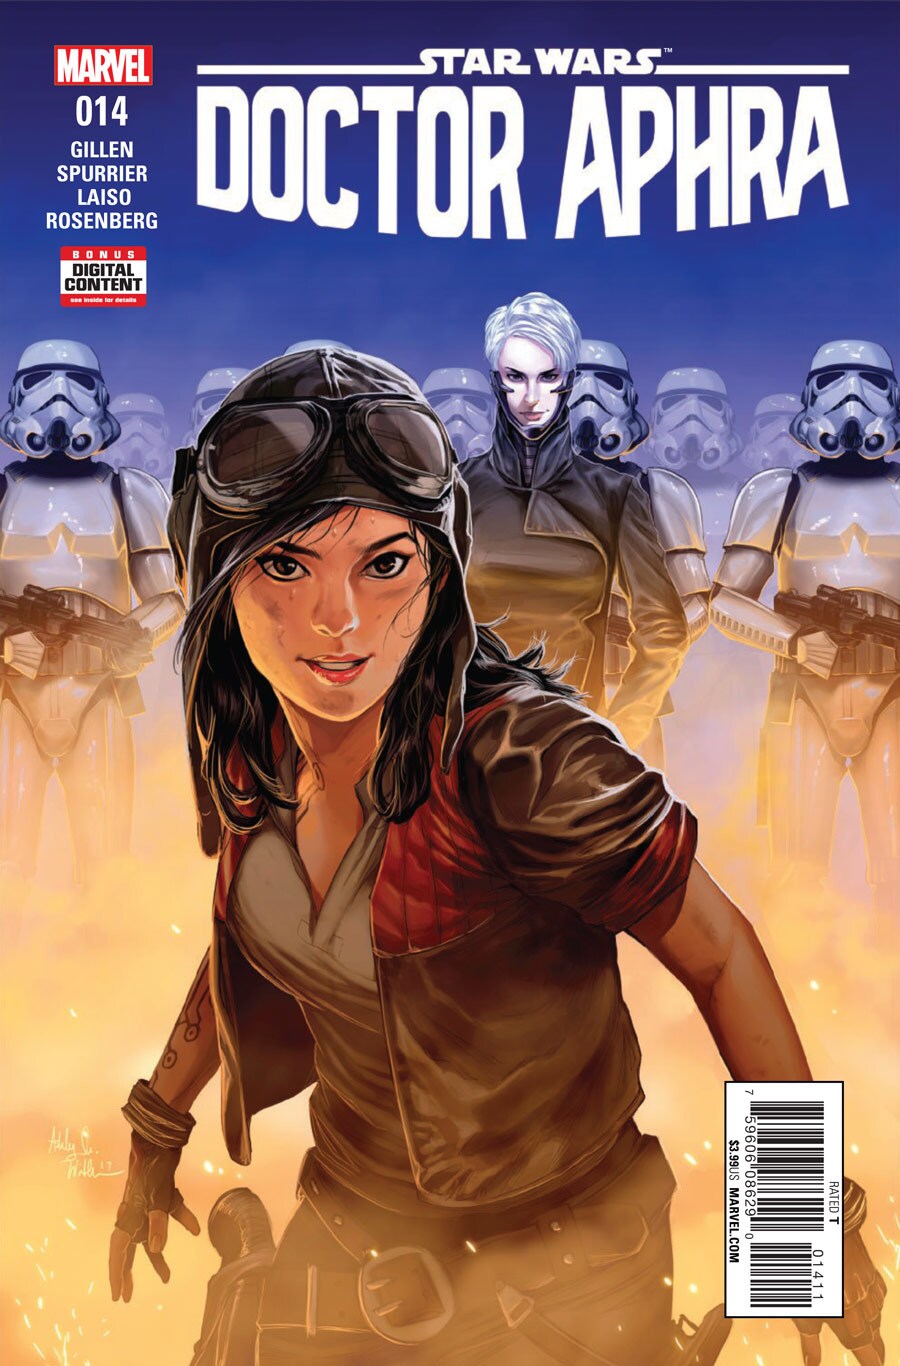 Doctor Aphra on the cover of Star Wars: Doctor Aphra number 14.